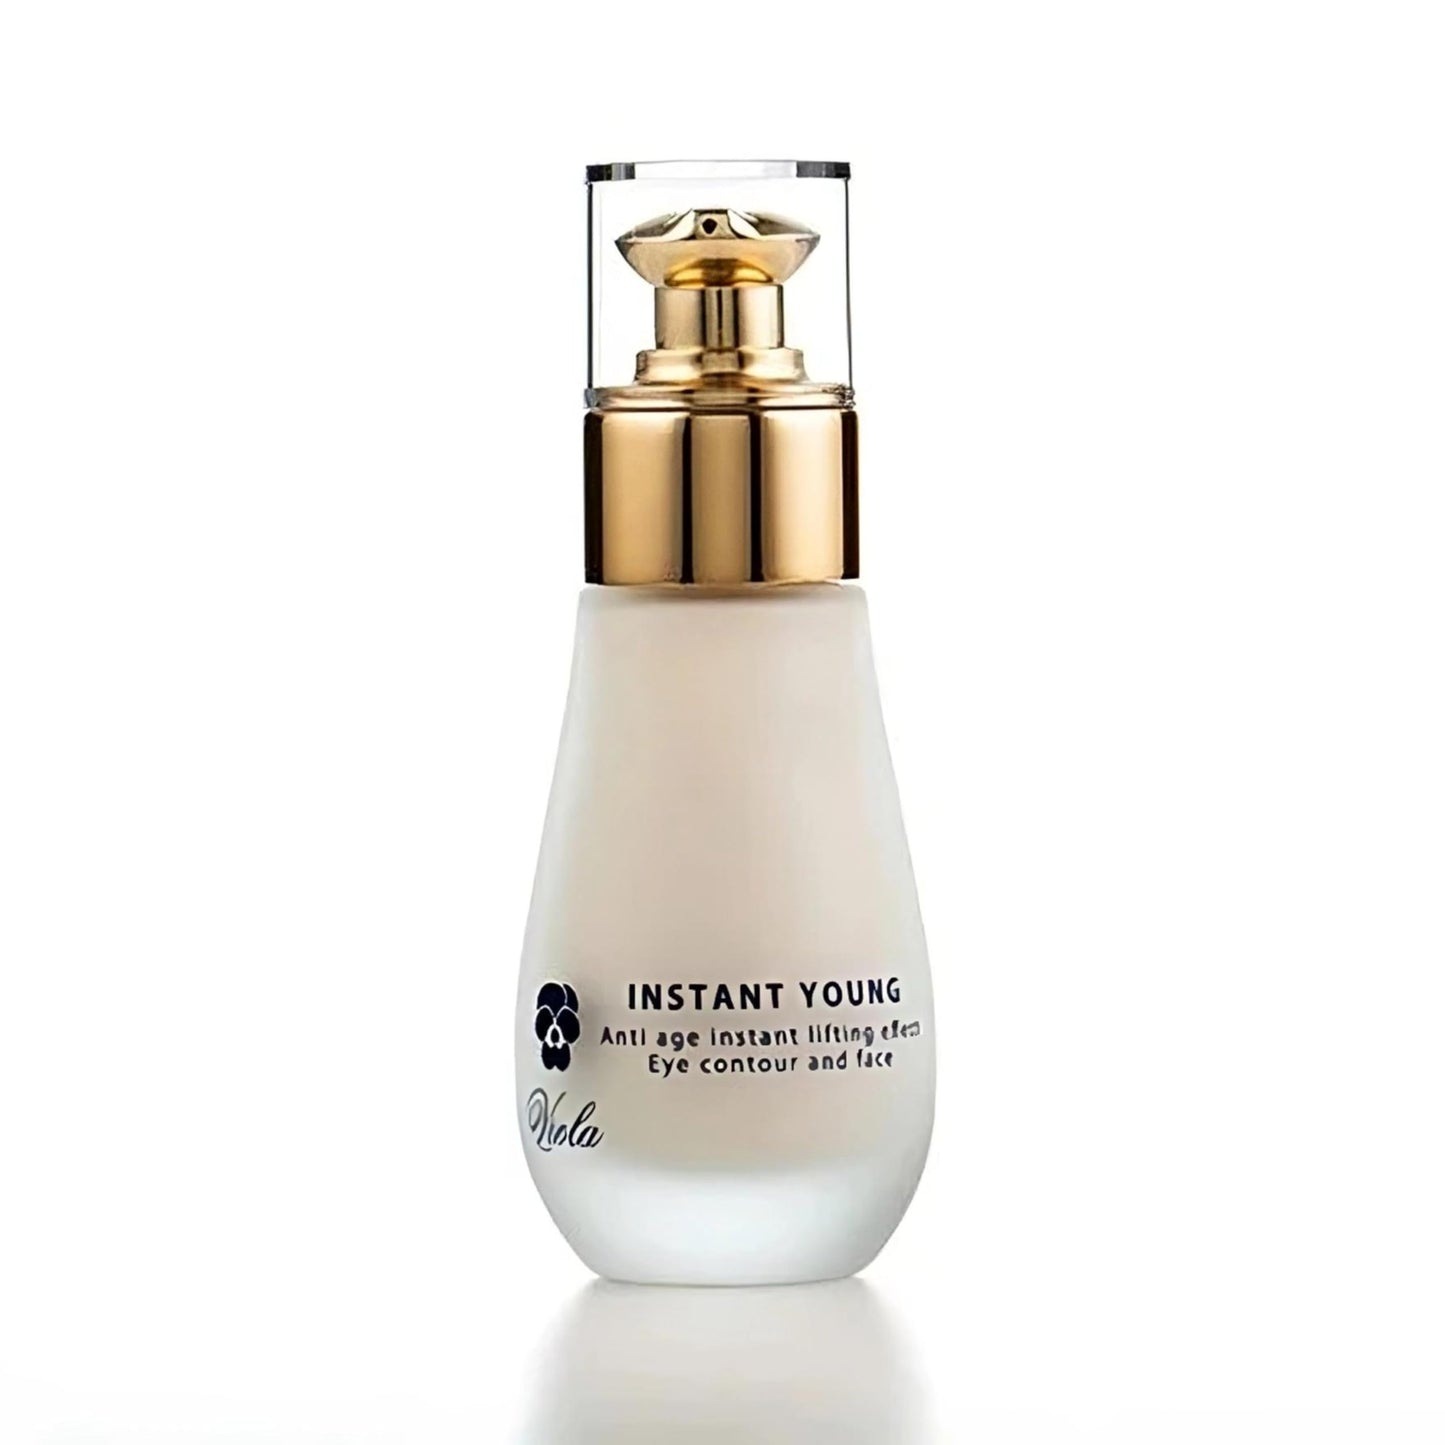 Viola Instant Young Anti Aging Eye Contour & Face Serum 50ml - Age Defying Radiance for Smoother, Firmer Skin